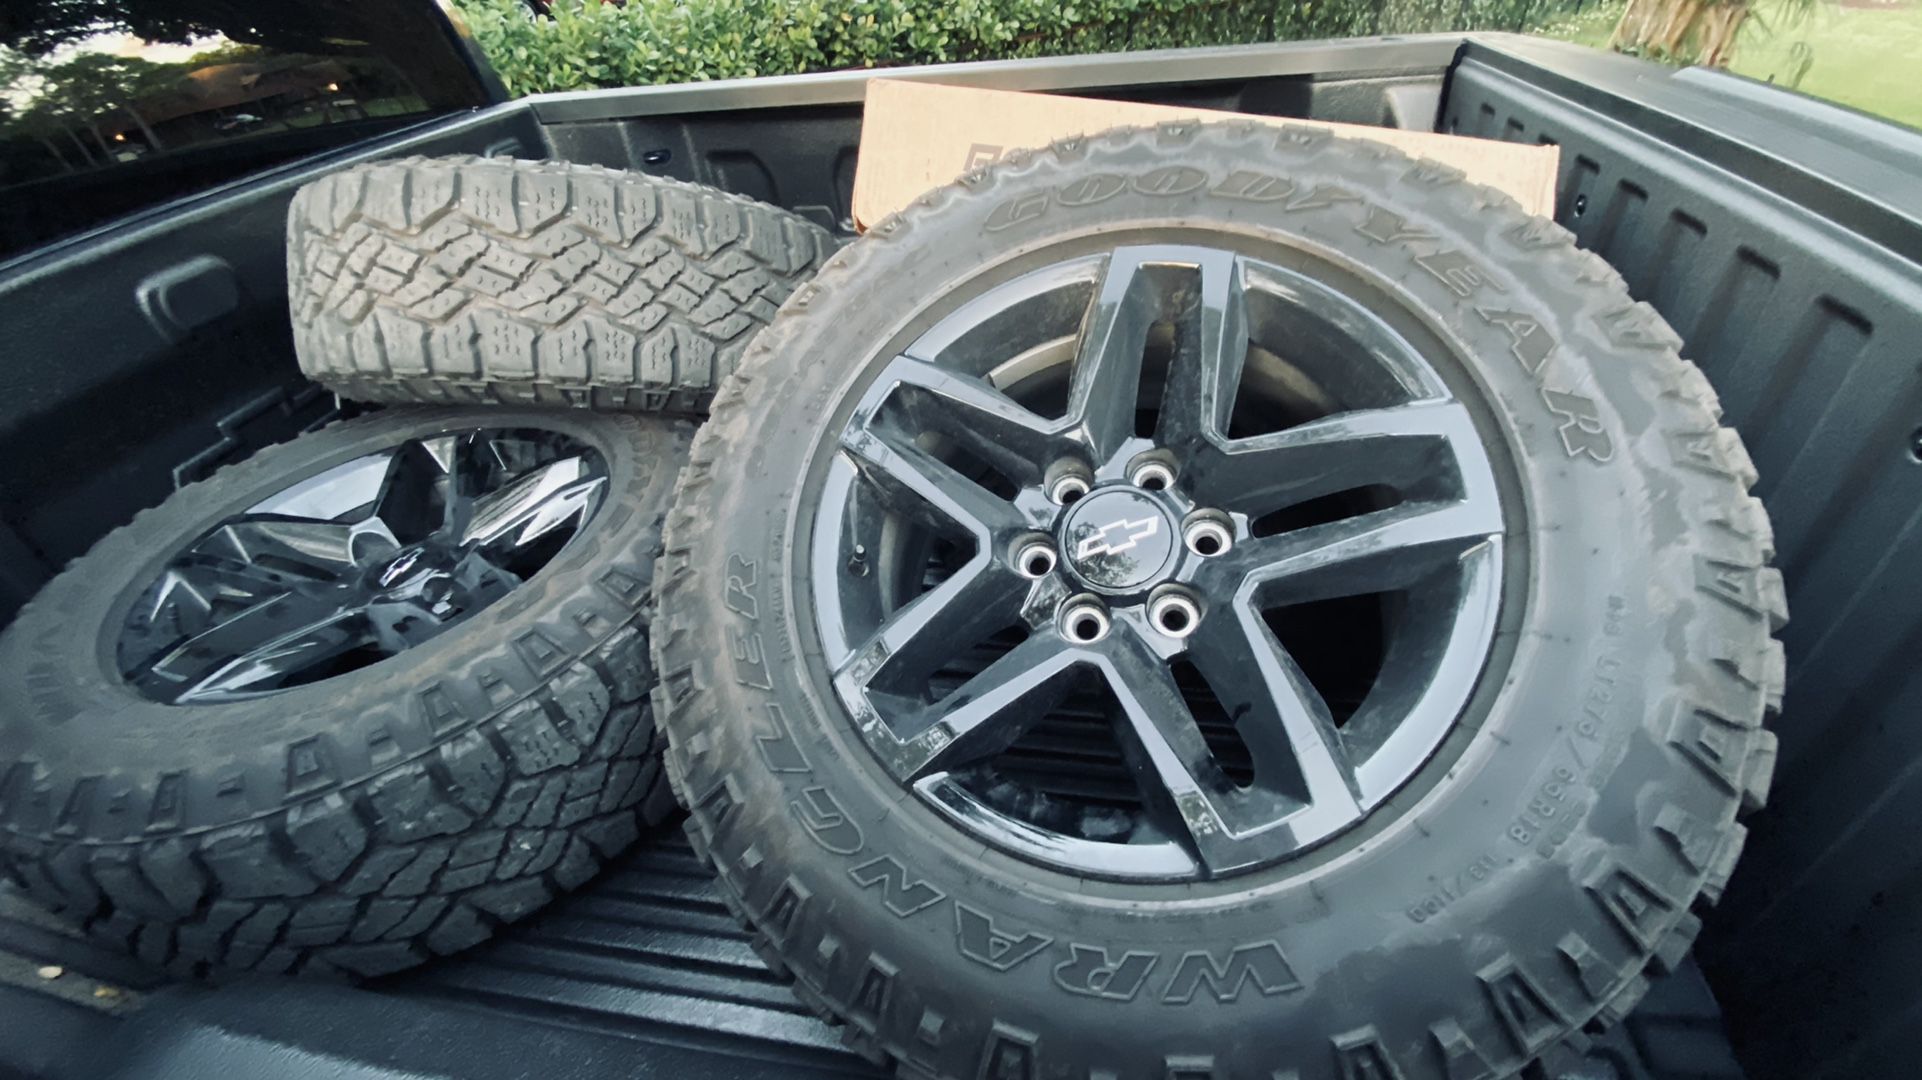 Truck Wheels, Tires, And Suspension